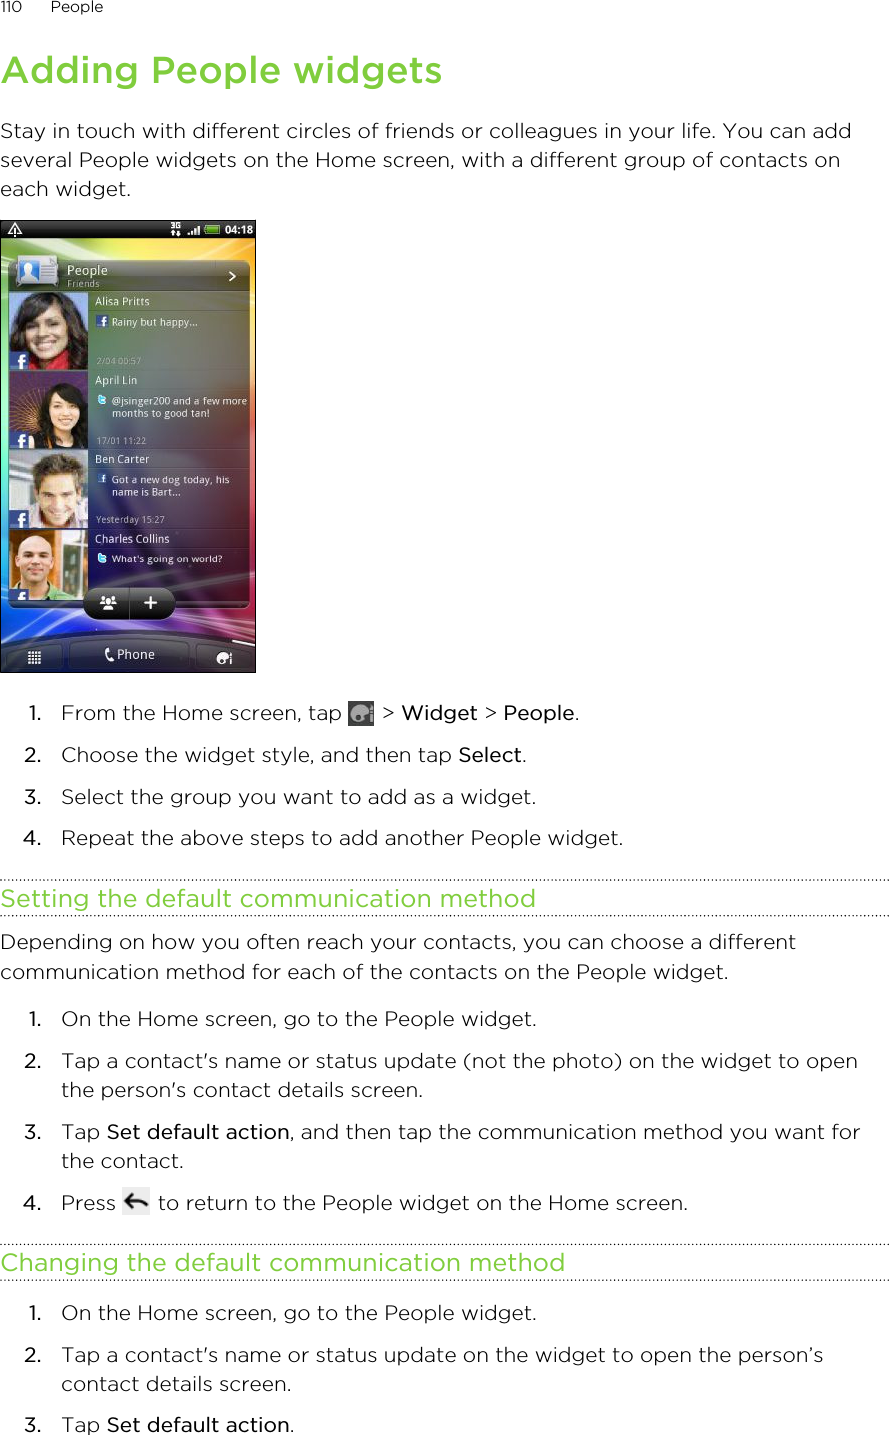 Adding People widgetsStay in touch with different circles of friends or colleagues in your life. You can addseveral People widgets on the Home screen, with a different group of contacts oneach widget.1. From the Home screen, tap   &gt; Widget &gt; People.2. Choose the widget style, and then tap Select.3. Select the group you want to add as a widget.4. Repeat the above steps to add another People widget.Setting the default communication methodDepending on how you often reach your contacts, you can choose a differentcommunication method for each of the contacts on the People widget.1. On the Home screen, go to the People widget.2. Tap a contact&apos;s name or status update (not the photo) on the widget to openthe person&apos;s contact details screen.3. Tap Set default action, and then tap the communication method you want forthe contact.4. Press   to return to the People widget on the Home screen.Changing the default communication method1. On the Home screen, go to the People widget.2. Tap a contact&apos;s name or status update on the widget to open the person’scontact details screen.3. Tap Set default action.110 People